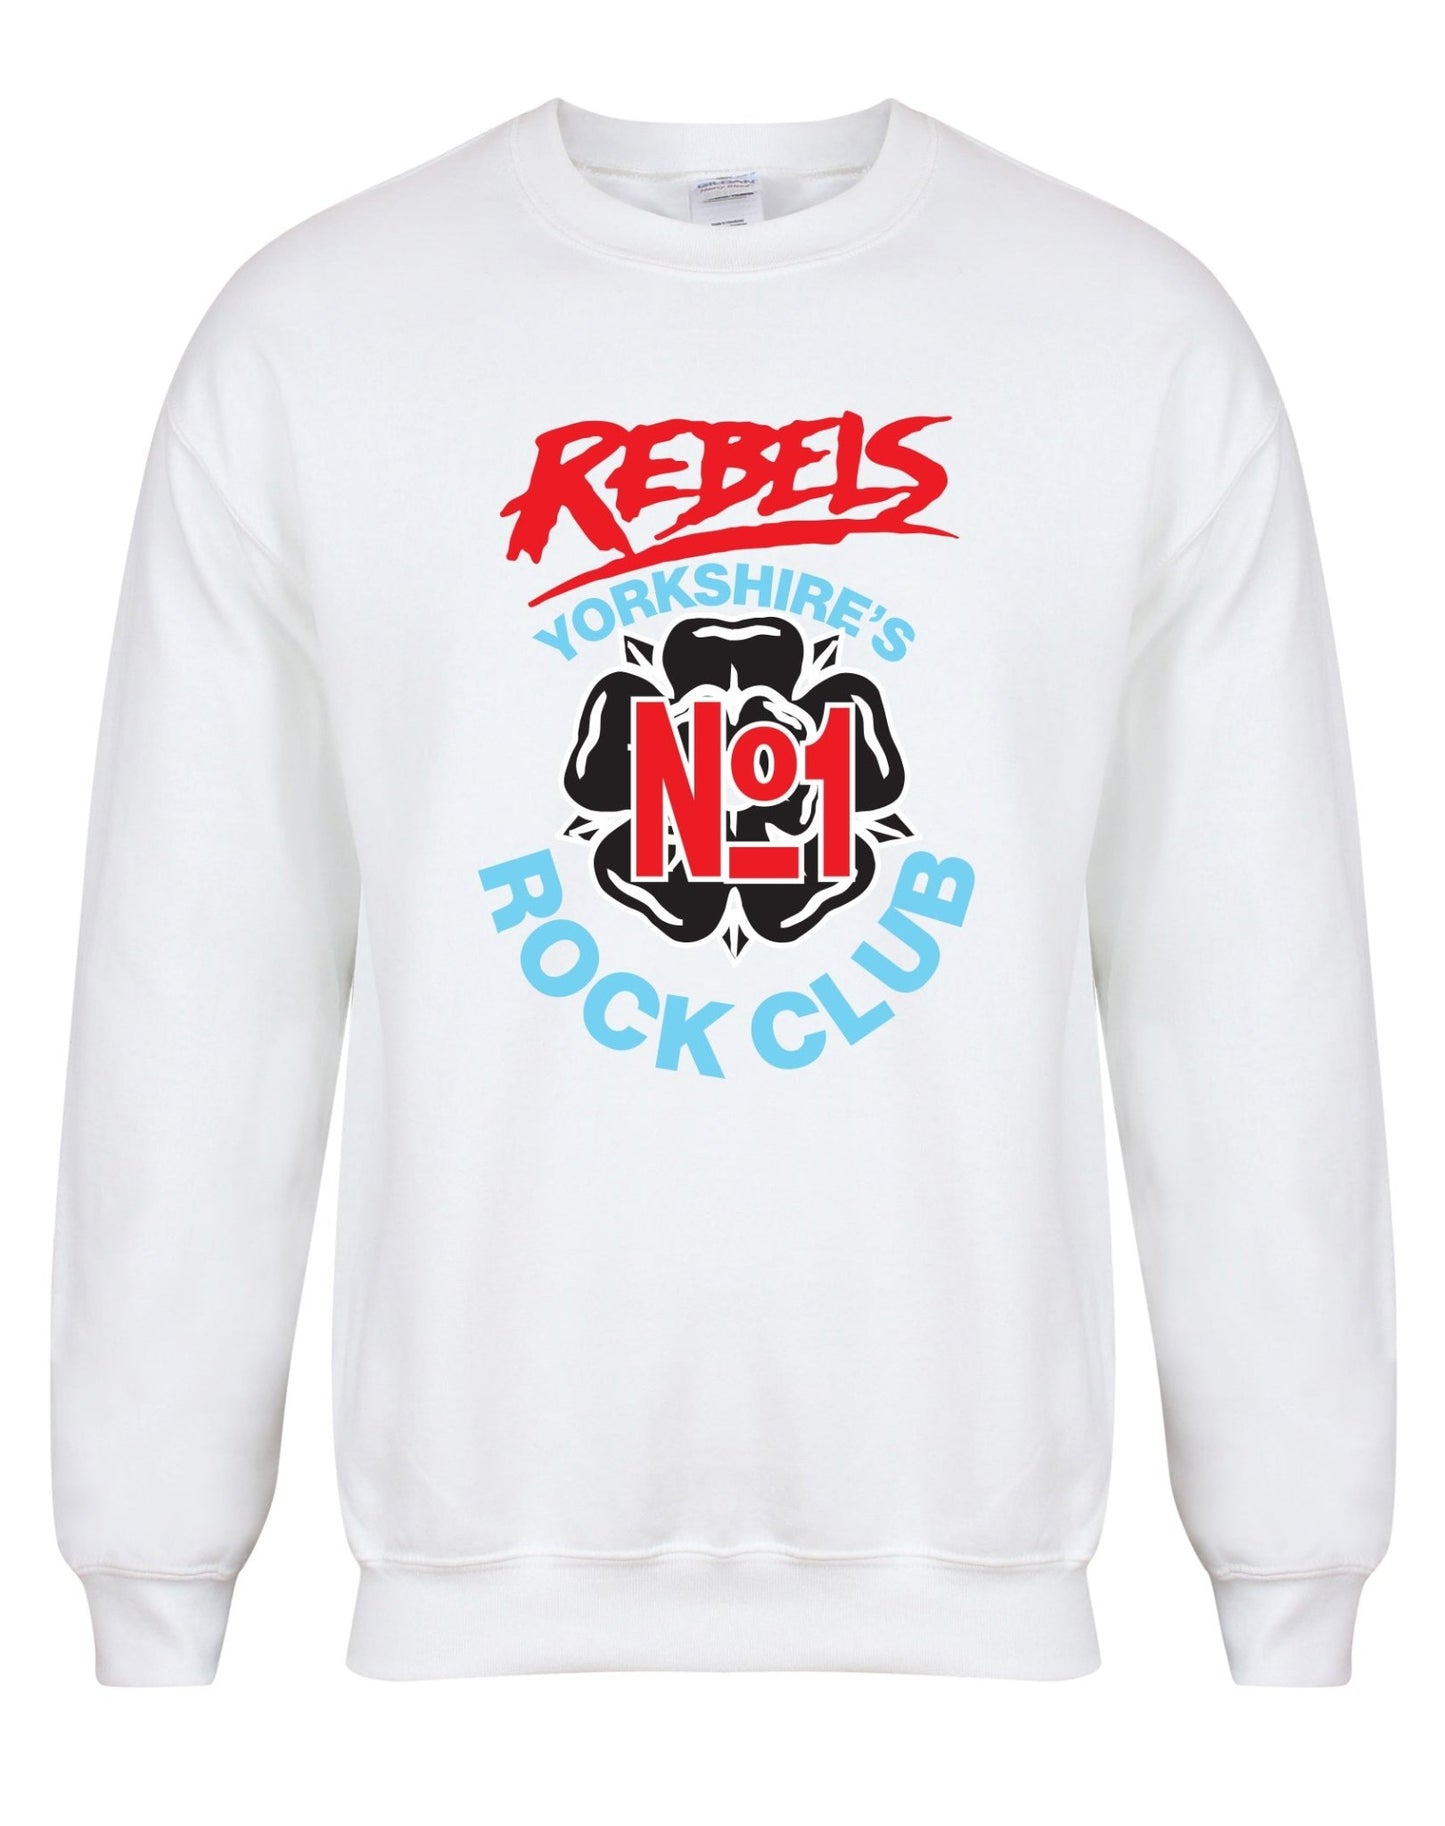 Rebels No. 1 rock club unisex fit sweatshirt - various colours - Dirty Stop Outs